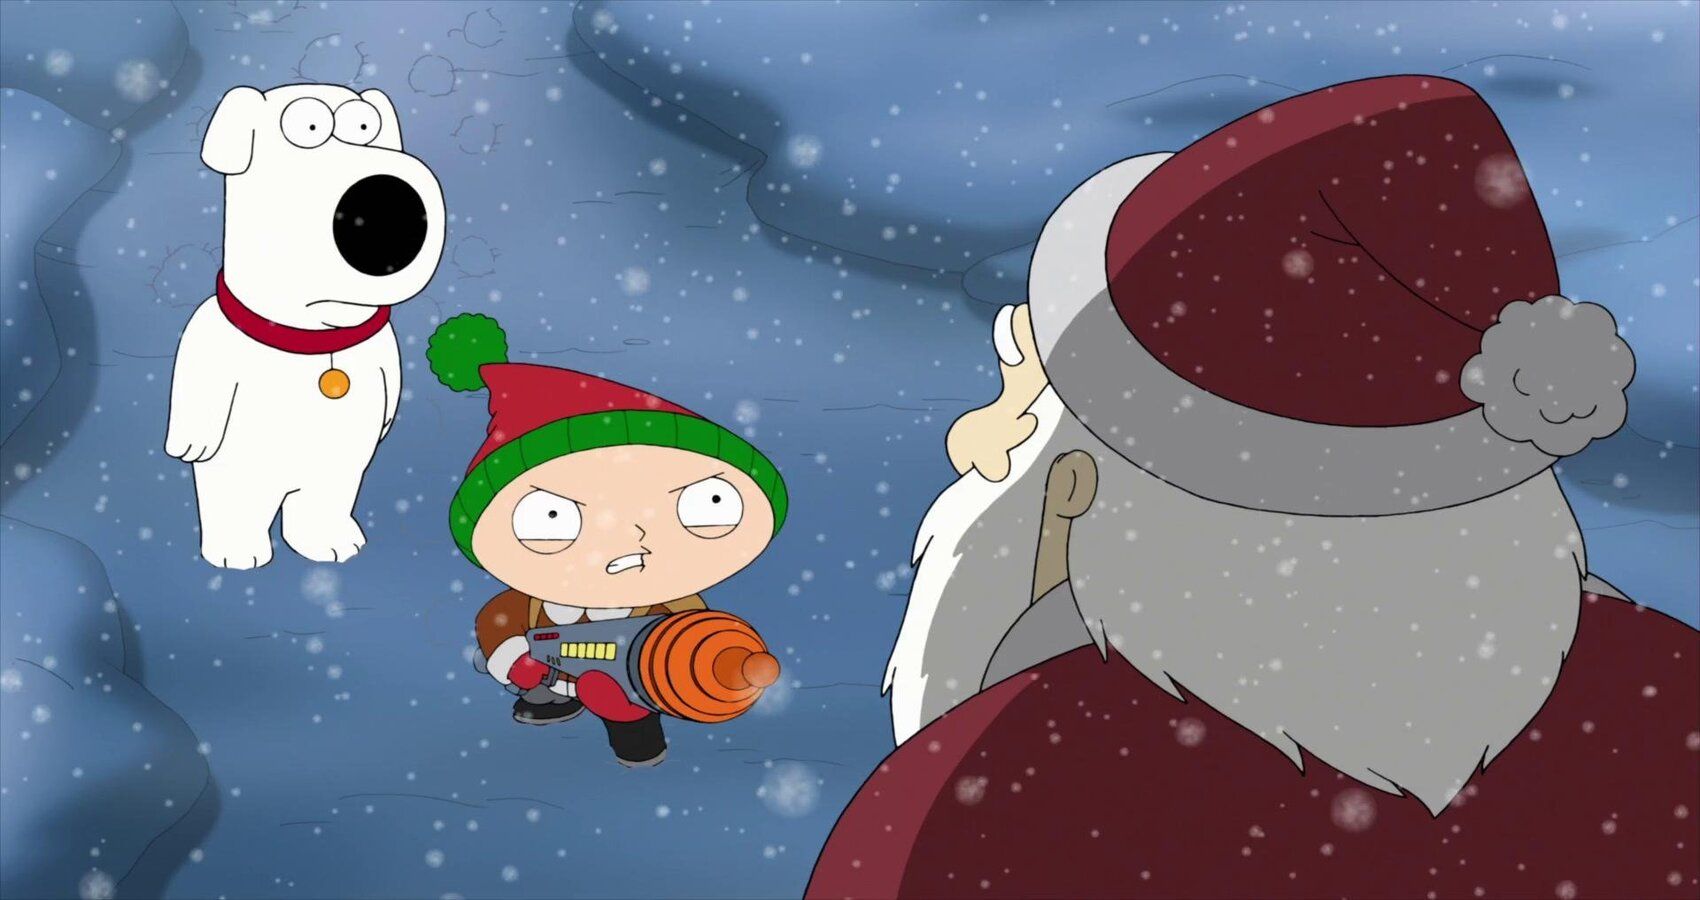 Stewie, Brian, and Santa in the snow